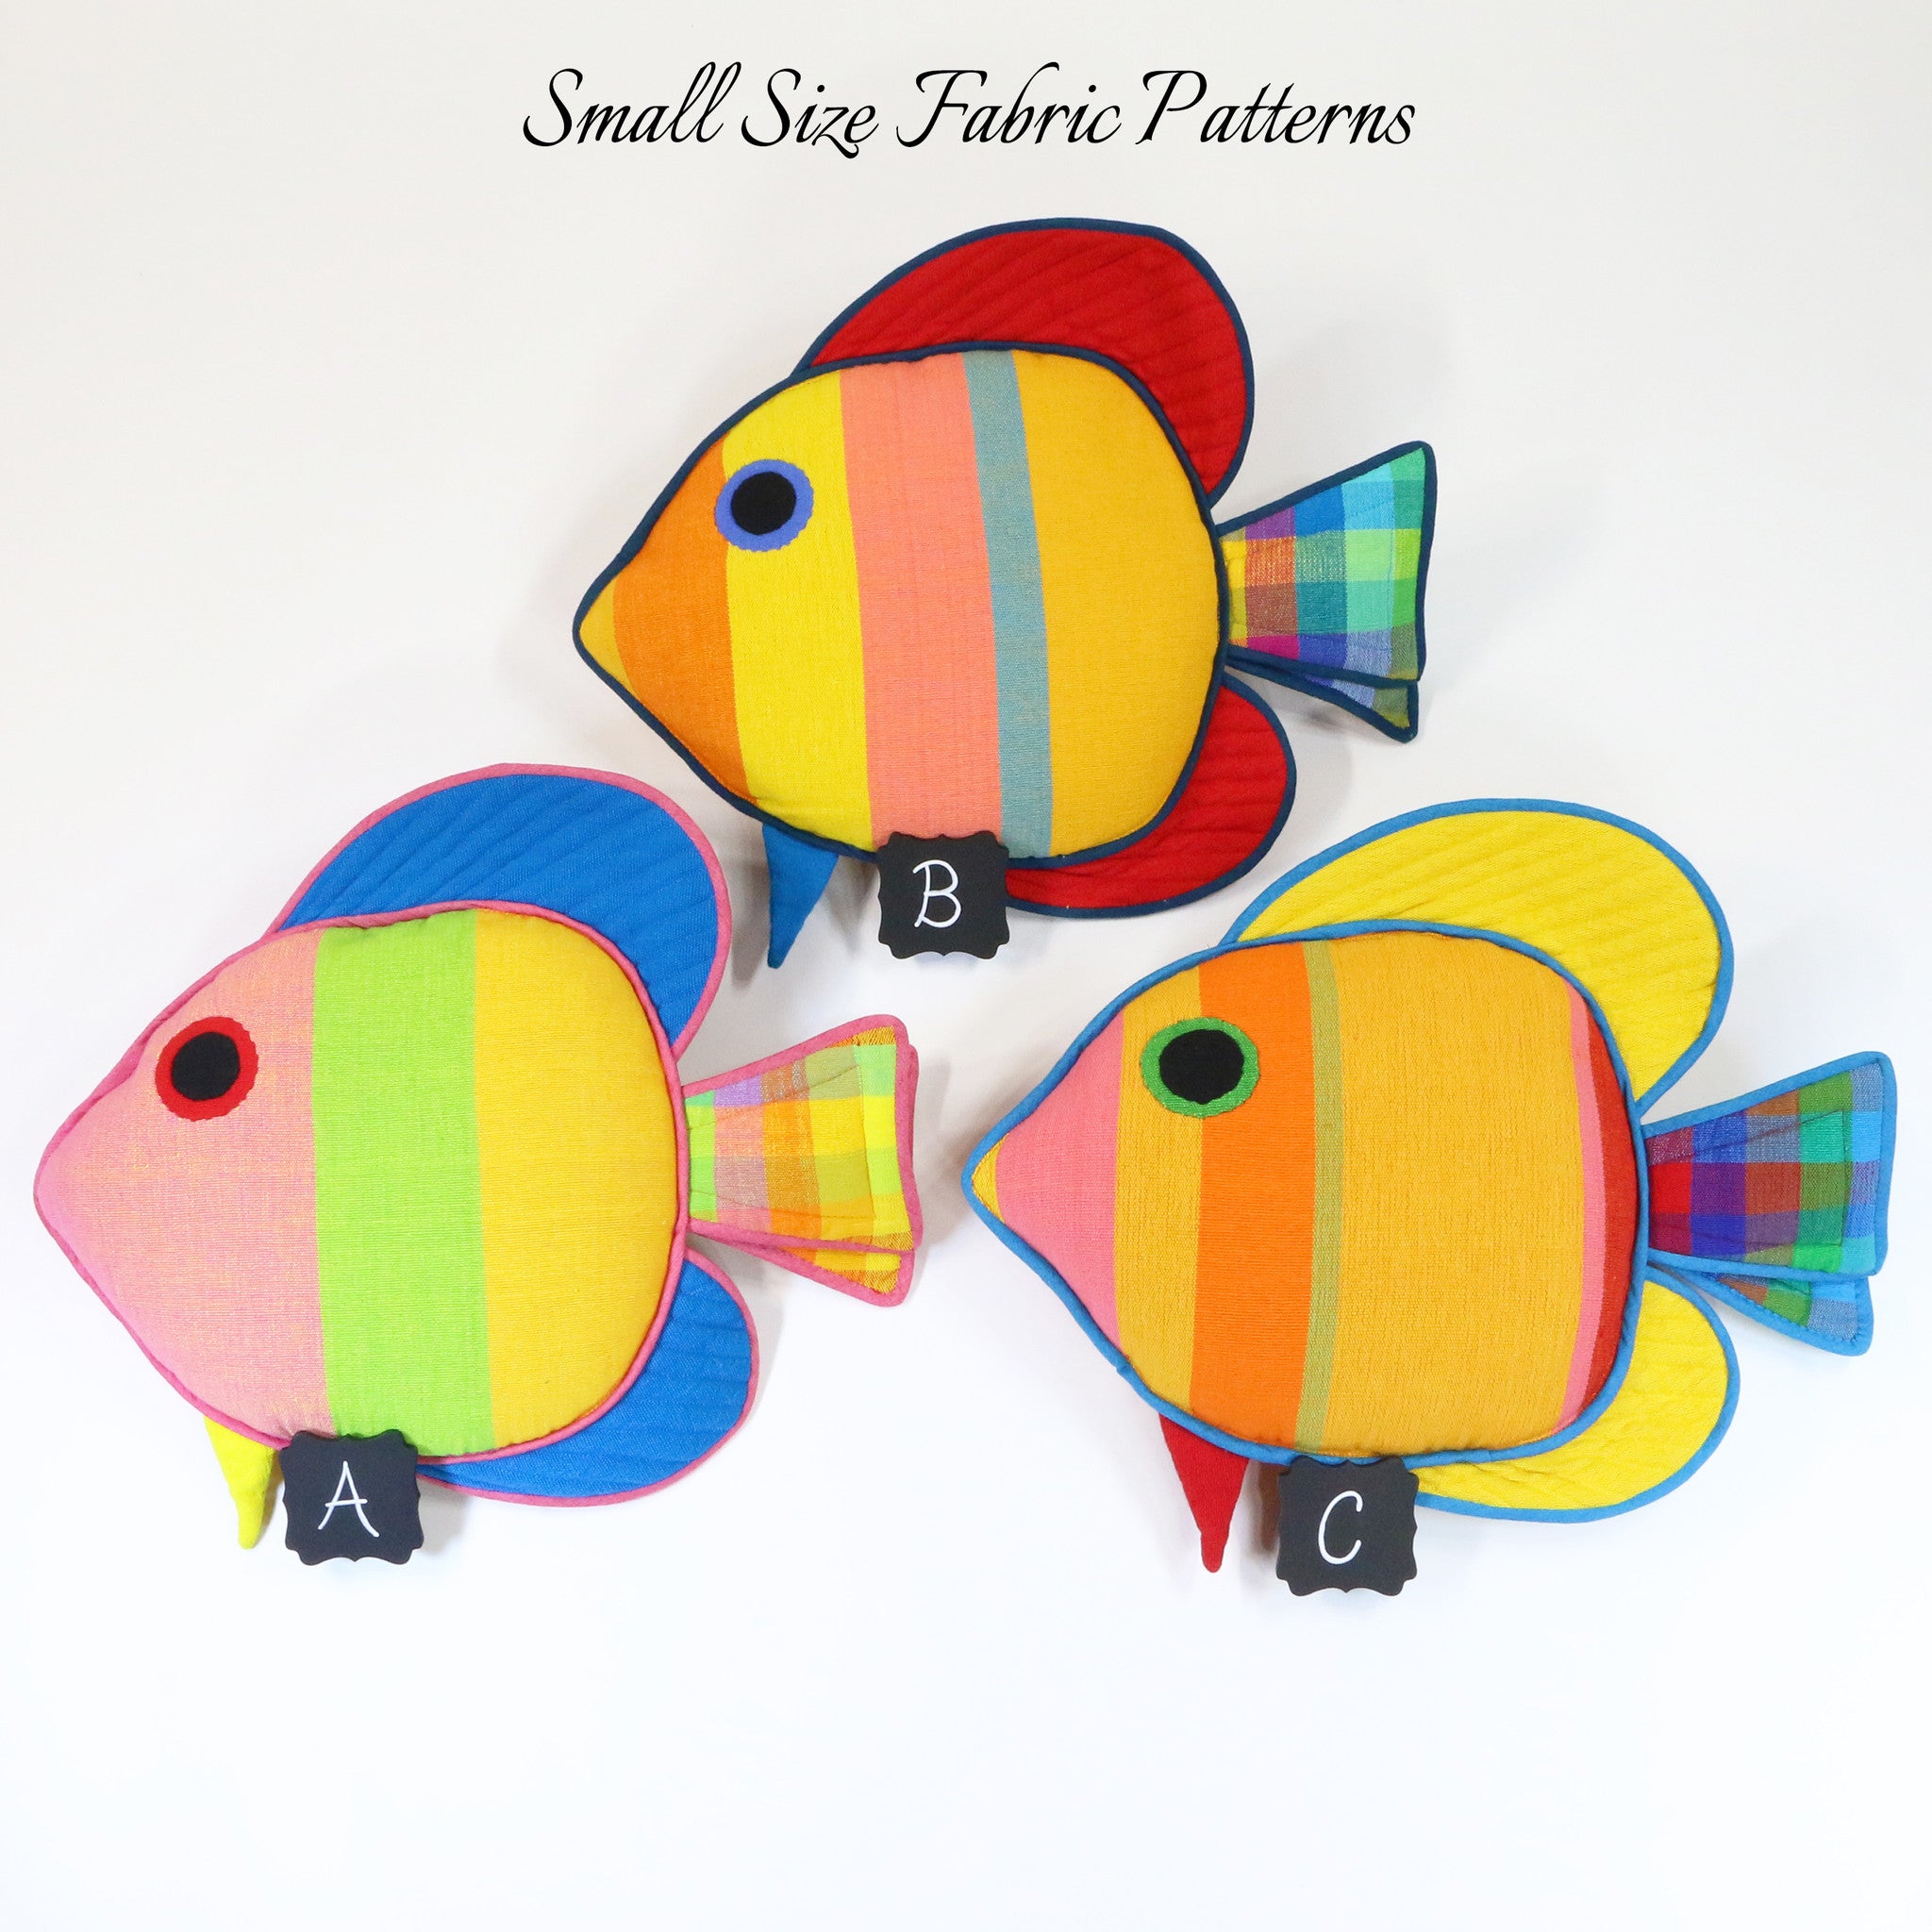 Daisy, the Sail Fin Fish – all small size fabric patterns shown